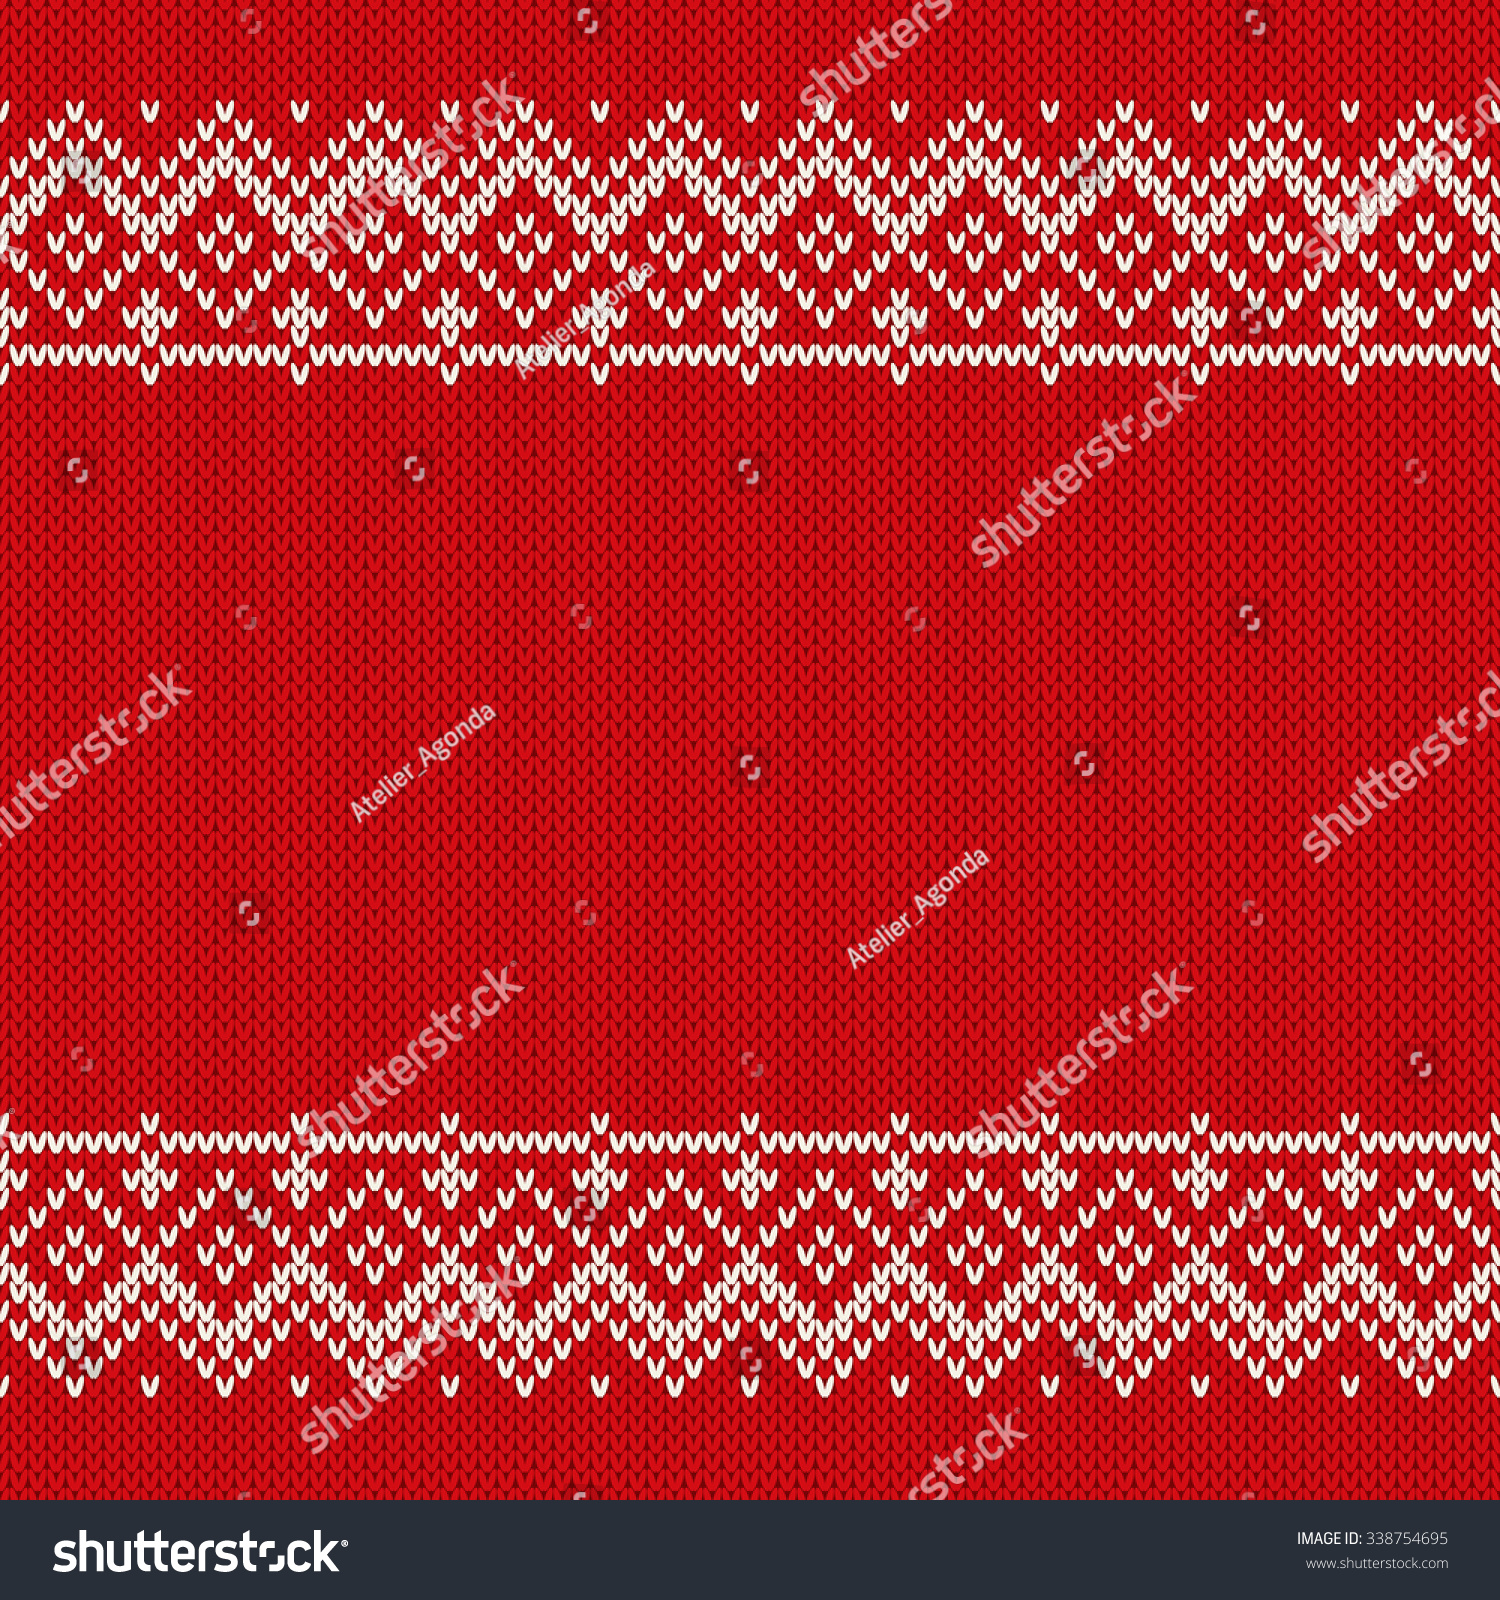 Christmas Sweater Design Seamless Knitted Pattern Stock Vector (Royalty ...